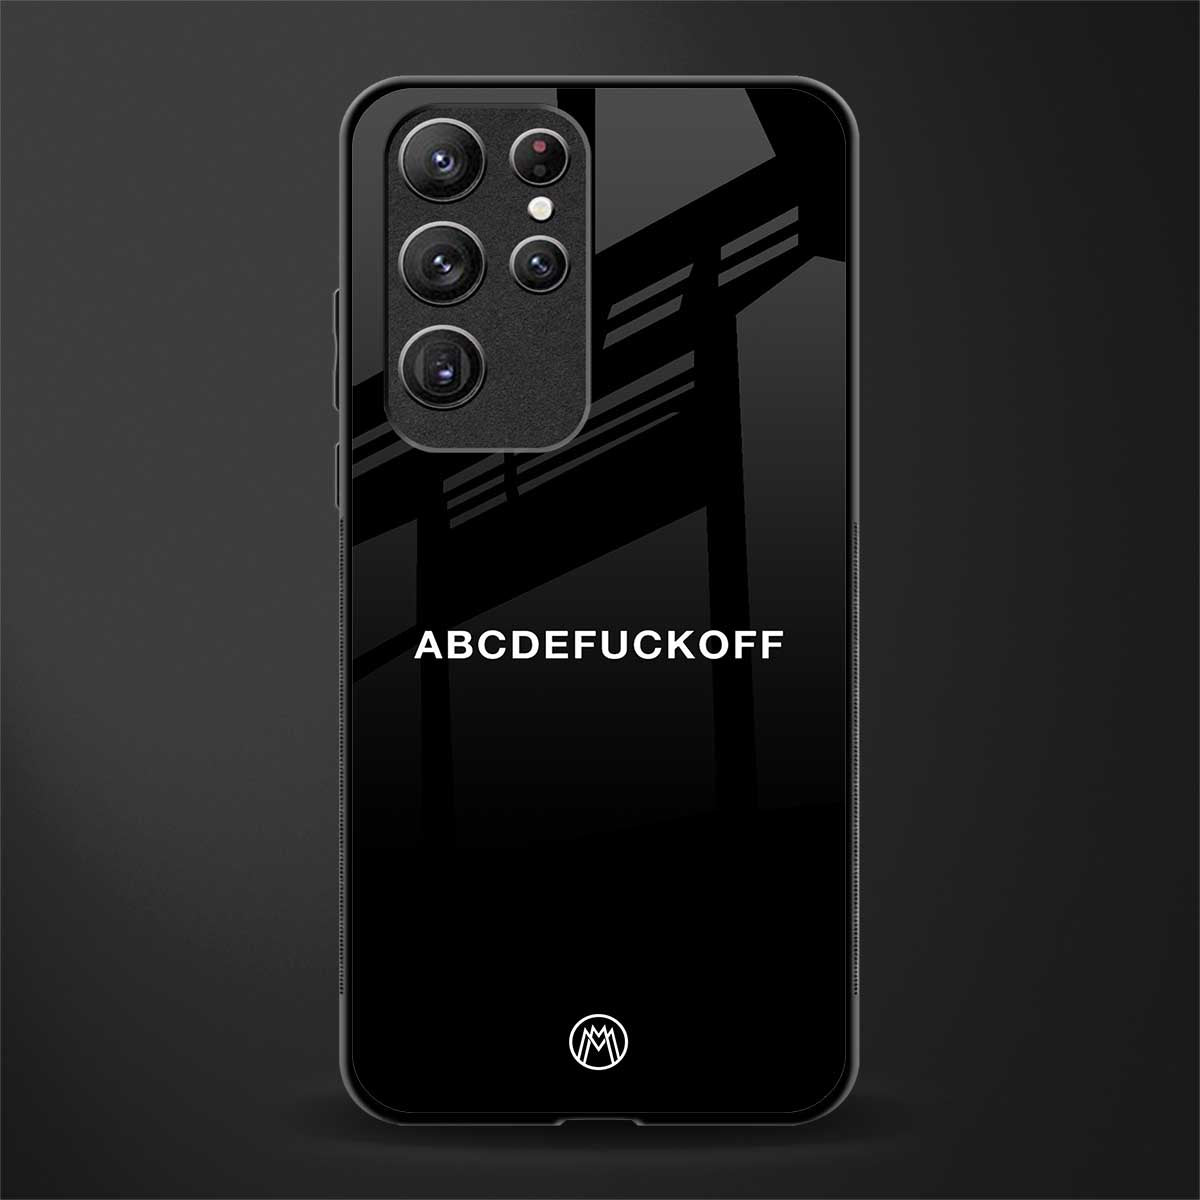 abcdefuckoff glass case for samsung galaxy s22 ultra 5g image